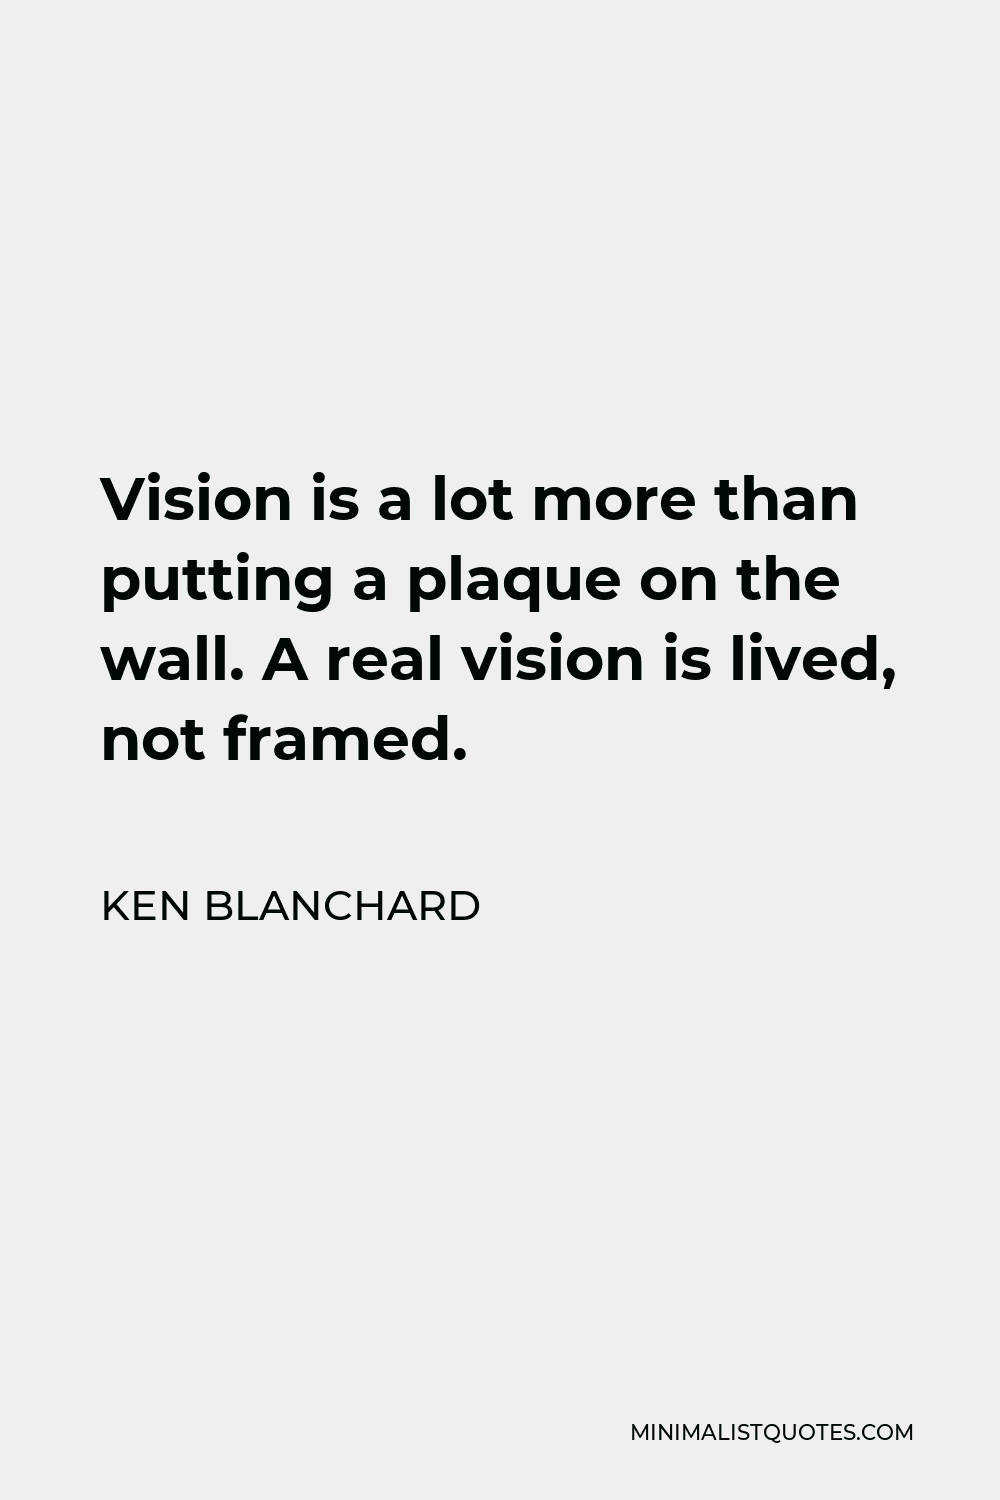 Ken Blanchard Quote - Vision is a lot more than putting a plaque on the wall. A real vision is lived, not framed.